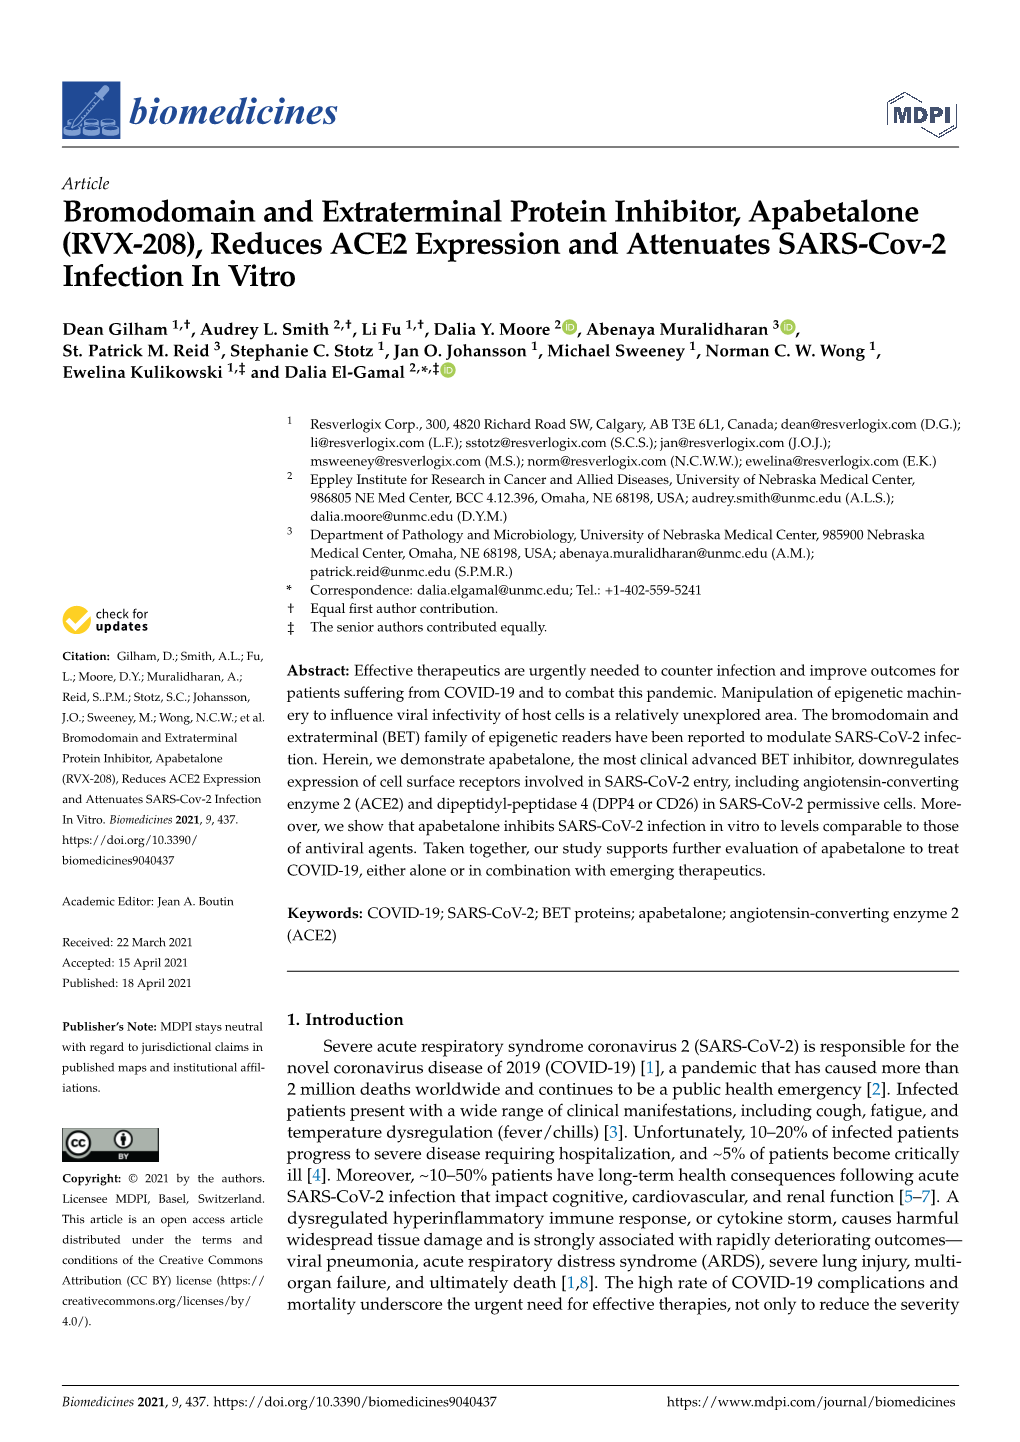 RVX-208), Reduces ACE2 Expression and Attenuates SARS-Cov-2 Infection in Vitro